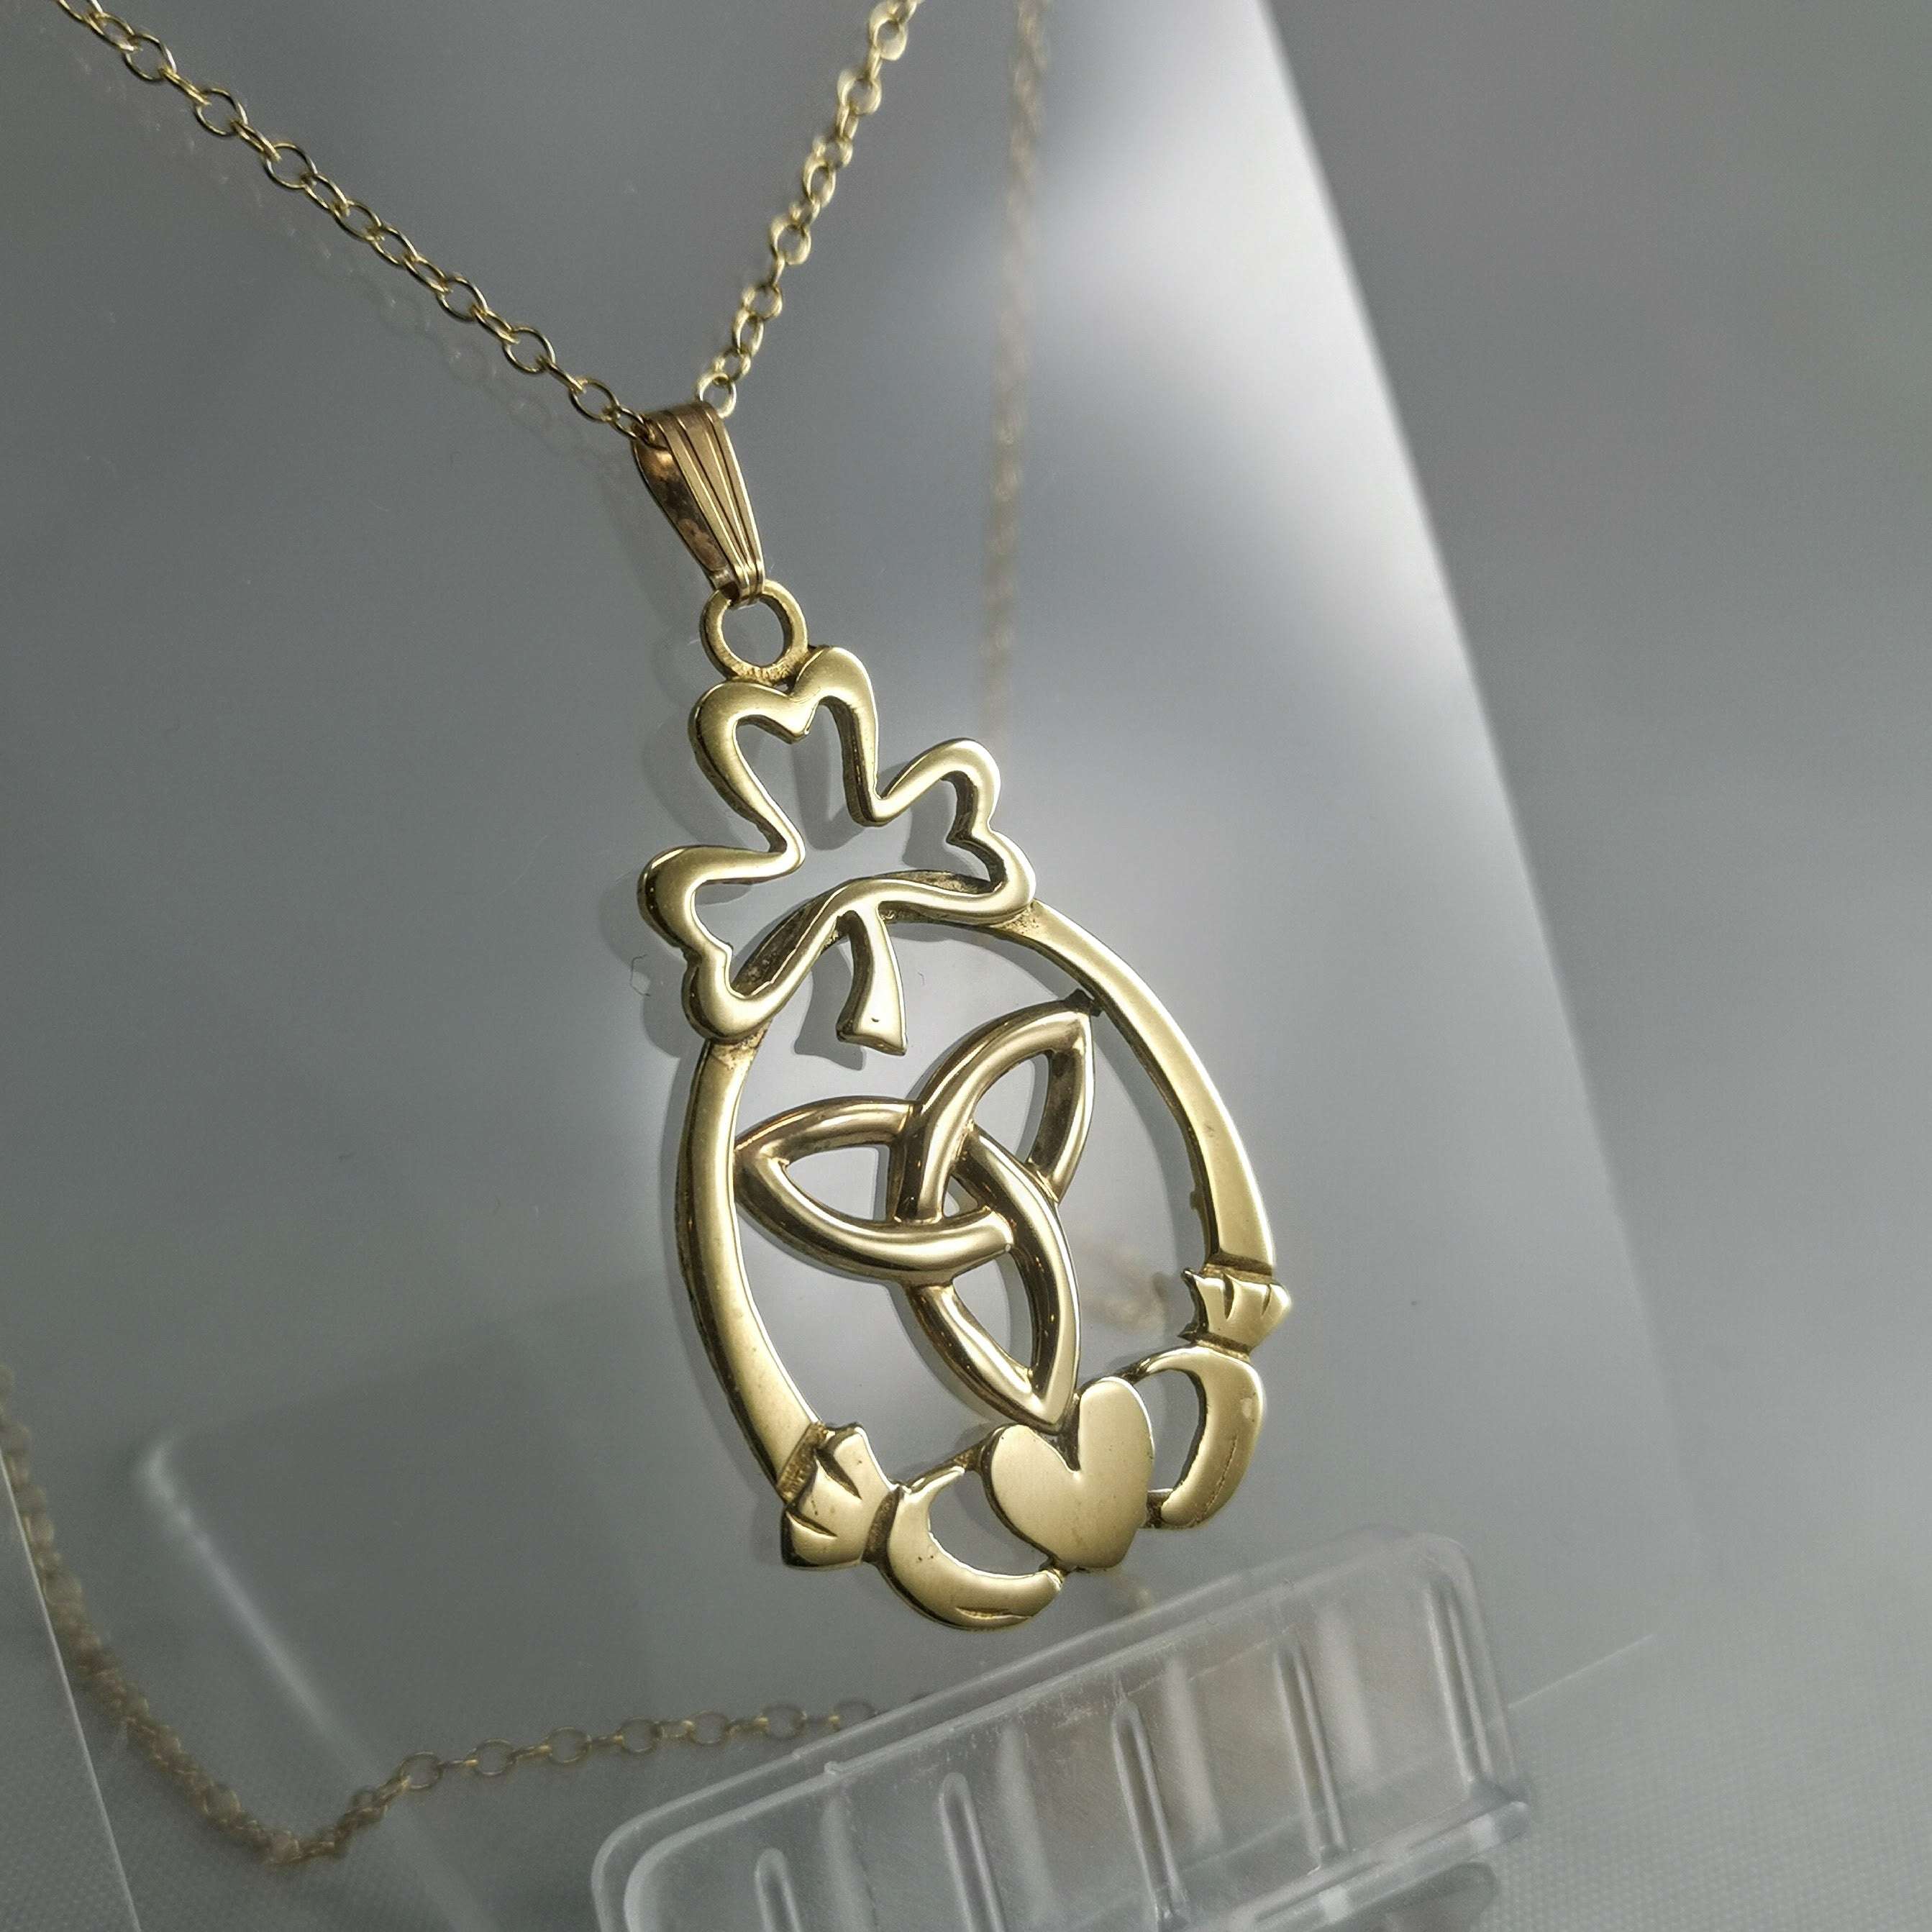 9ct gold Irish celtic claddagh, shamrock and trinity knot heavy pendant on an 18" gold chain